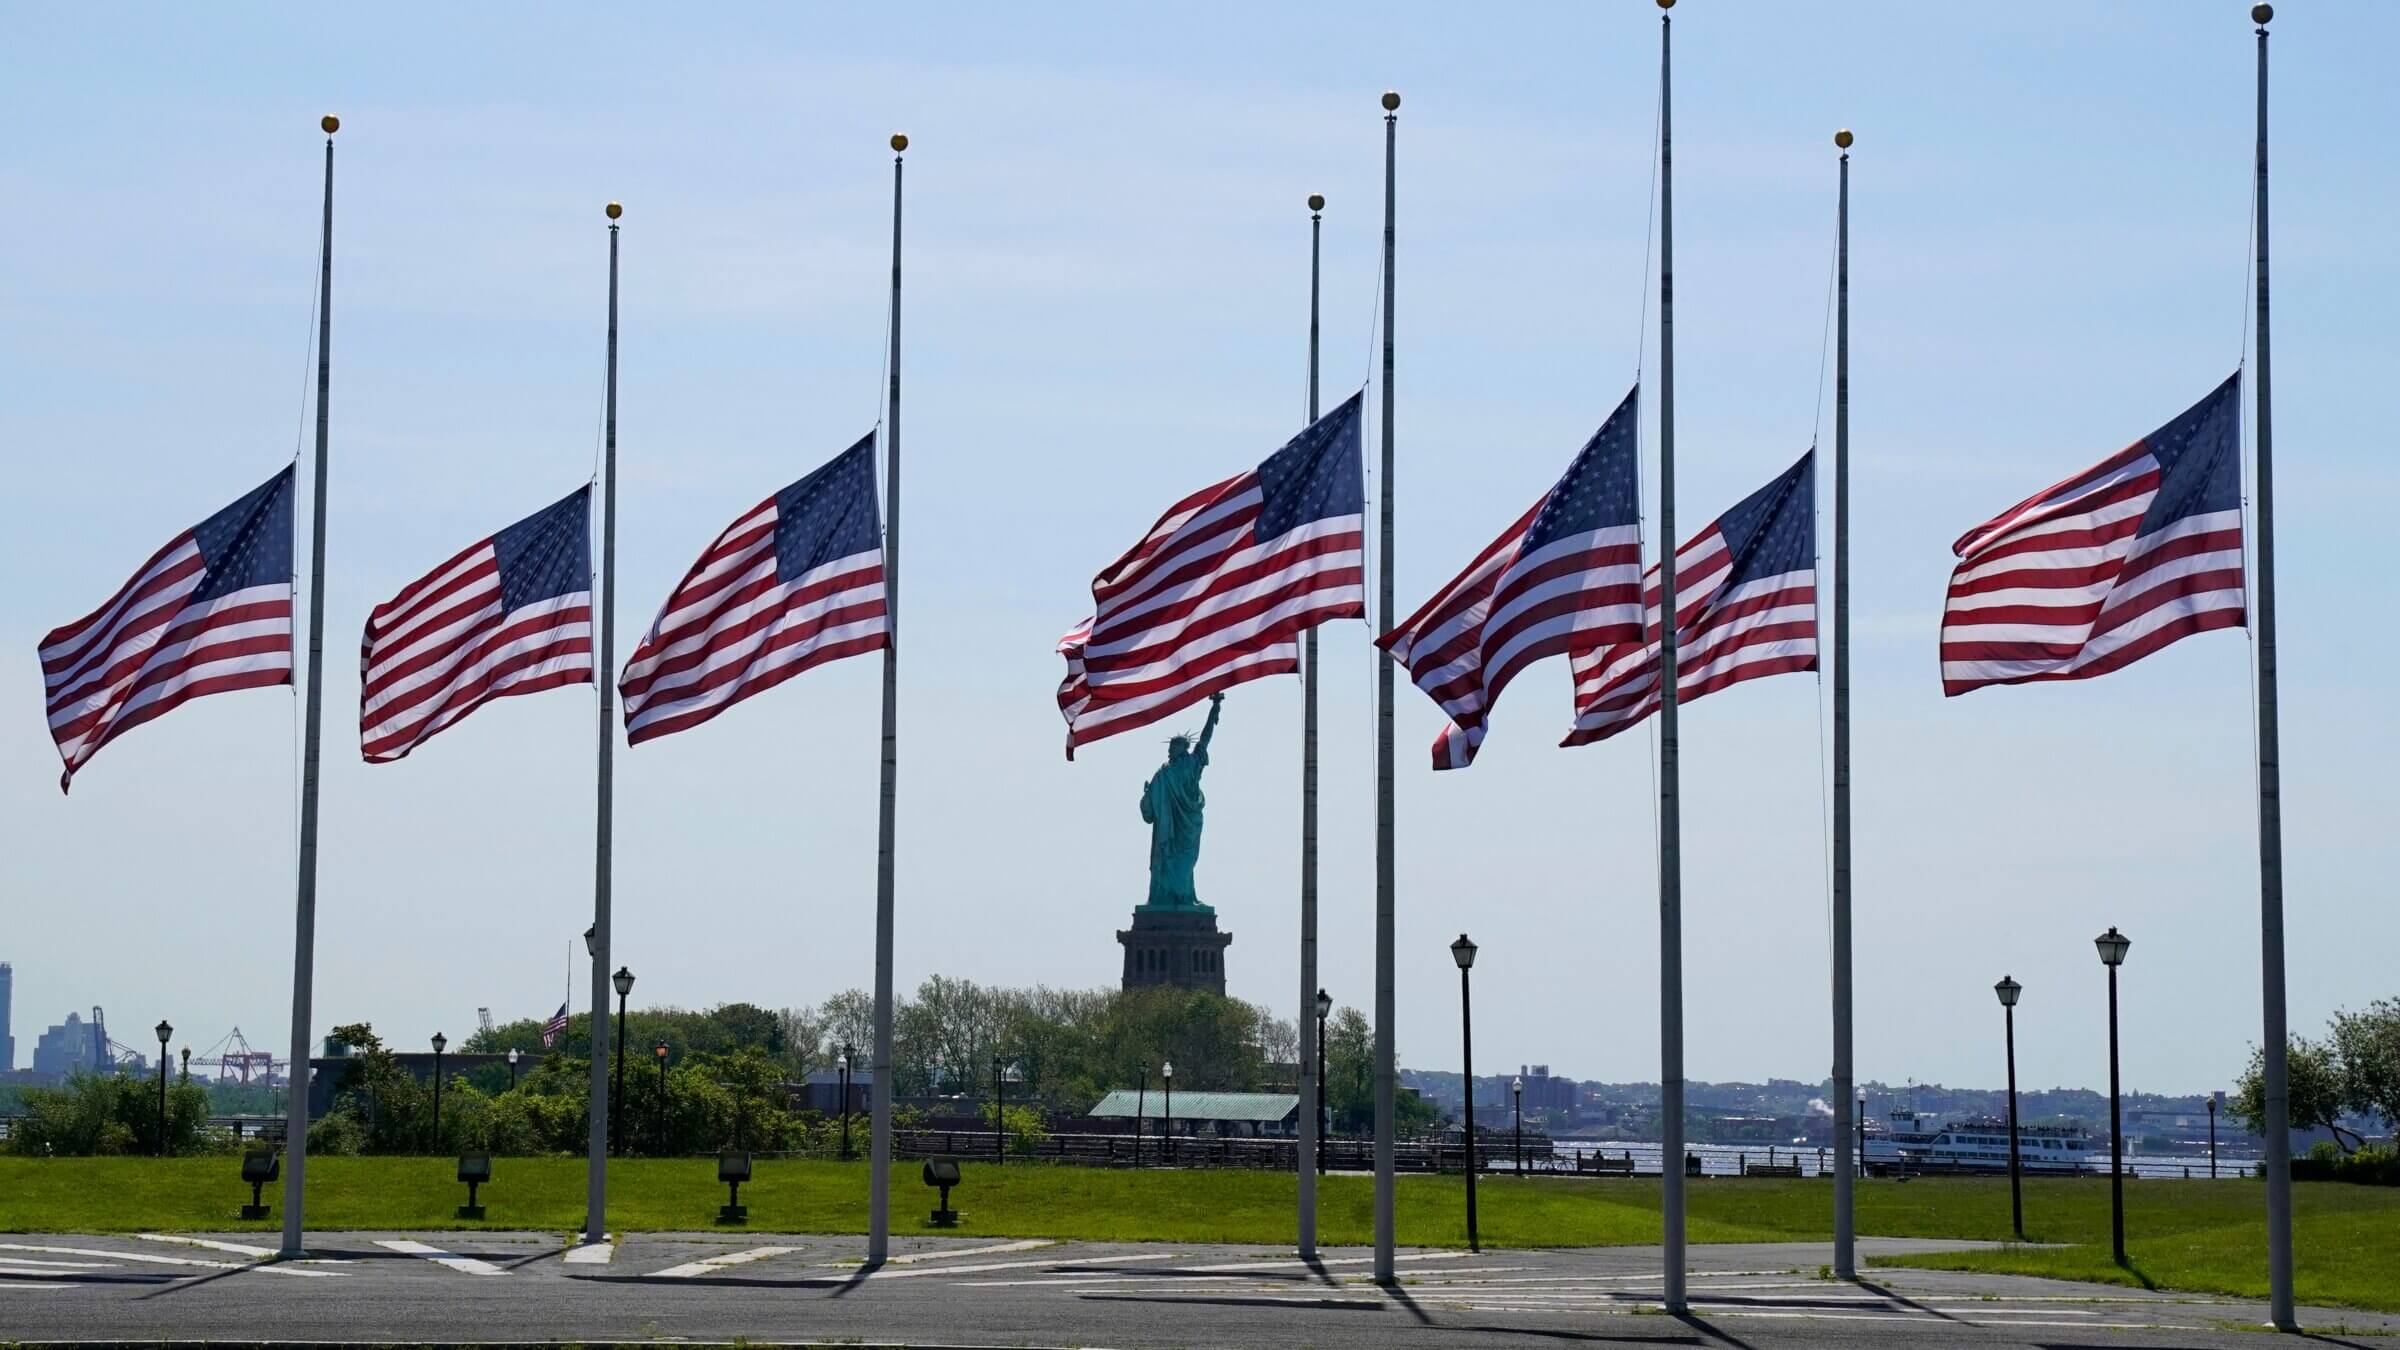 American flags, fly at half-mast to remember the victims of the May 24 shooting at Robb Elementary School in Uvalde, Texas.